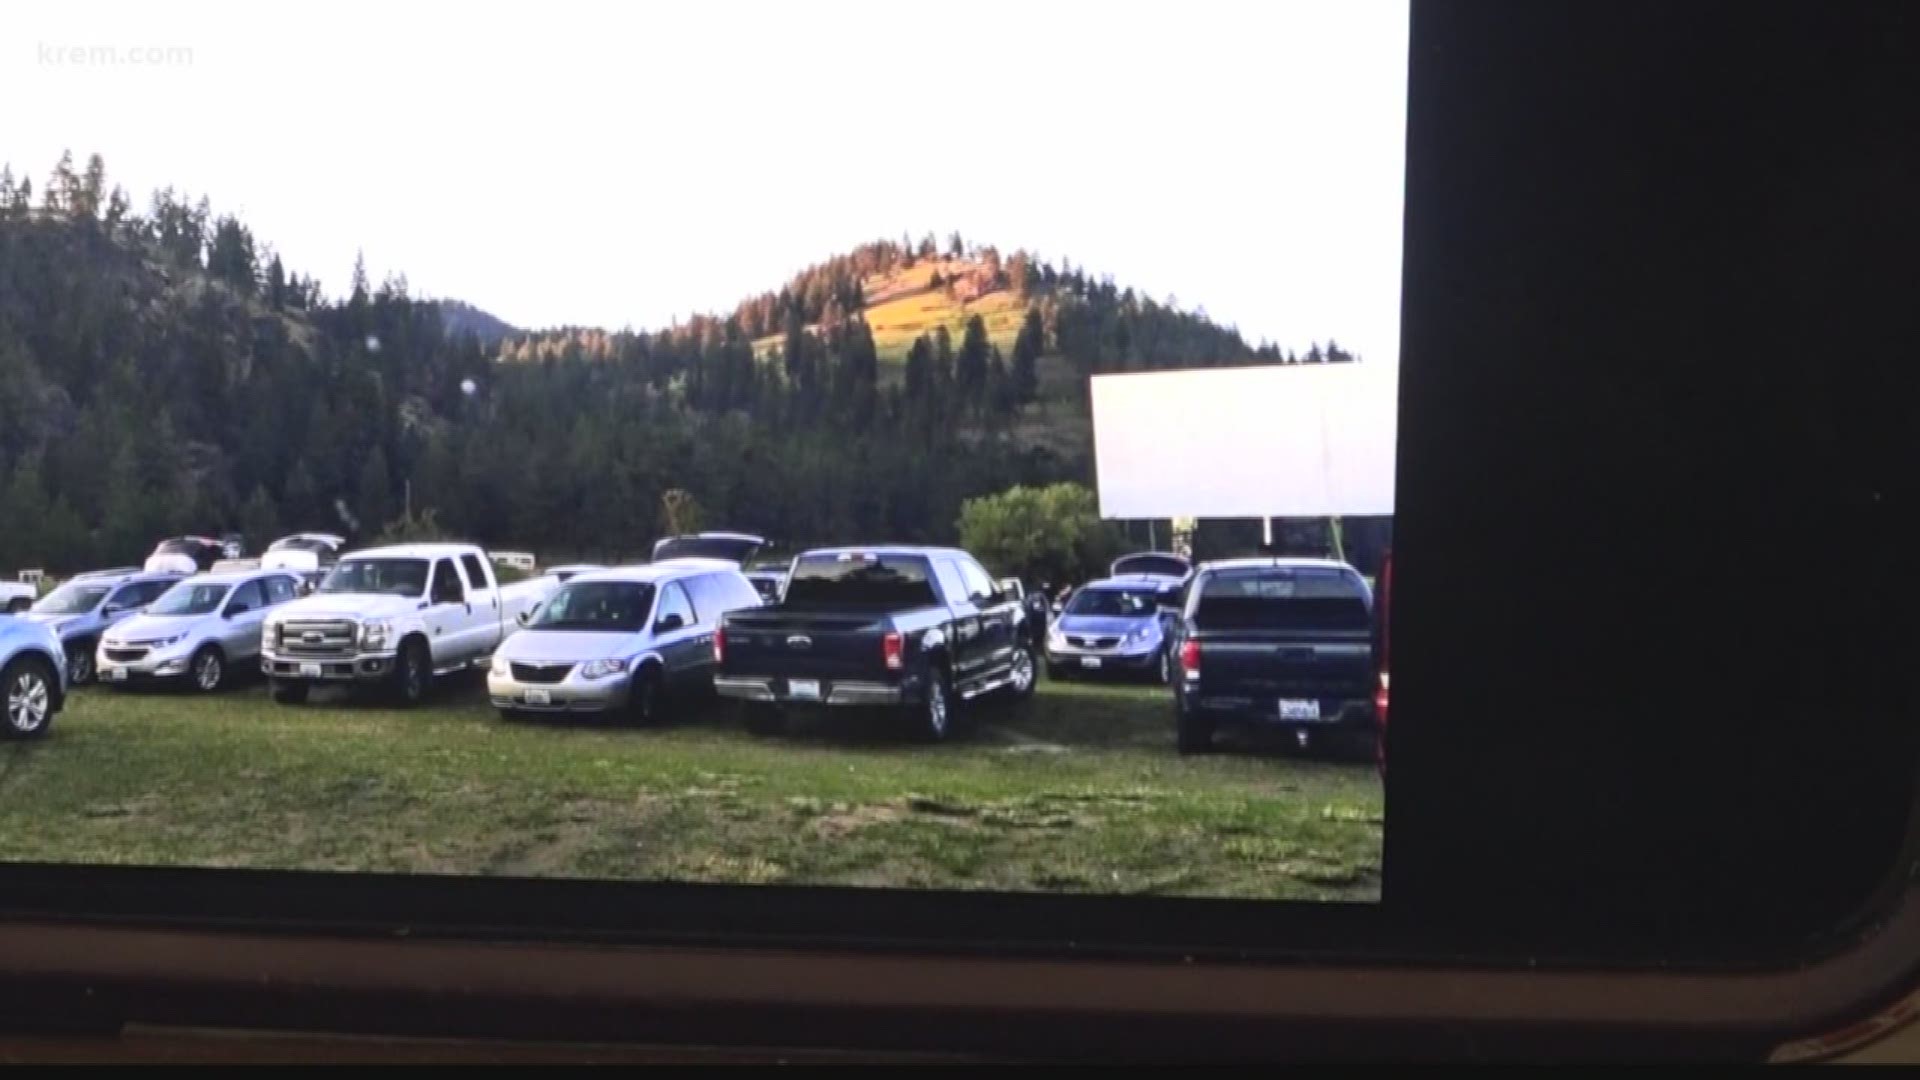 Under the stay at home order movie theaters aren't allowed to open until phase four.  But the only drive-in theater in Eastern Washington is planning to open May 29.